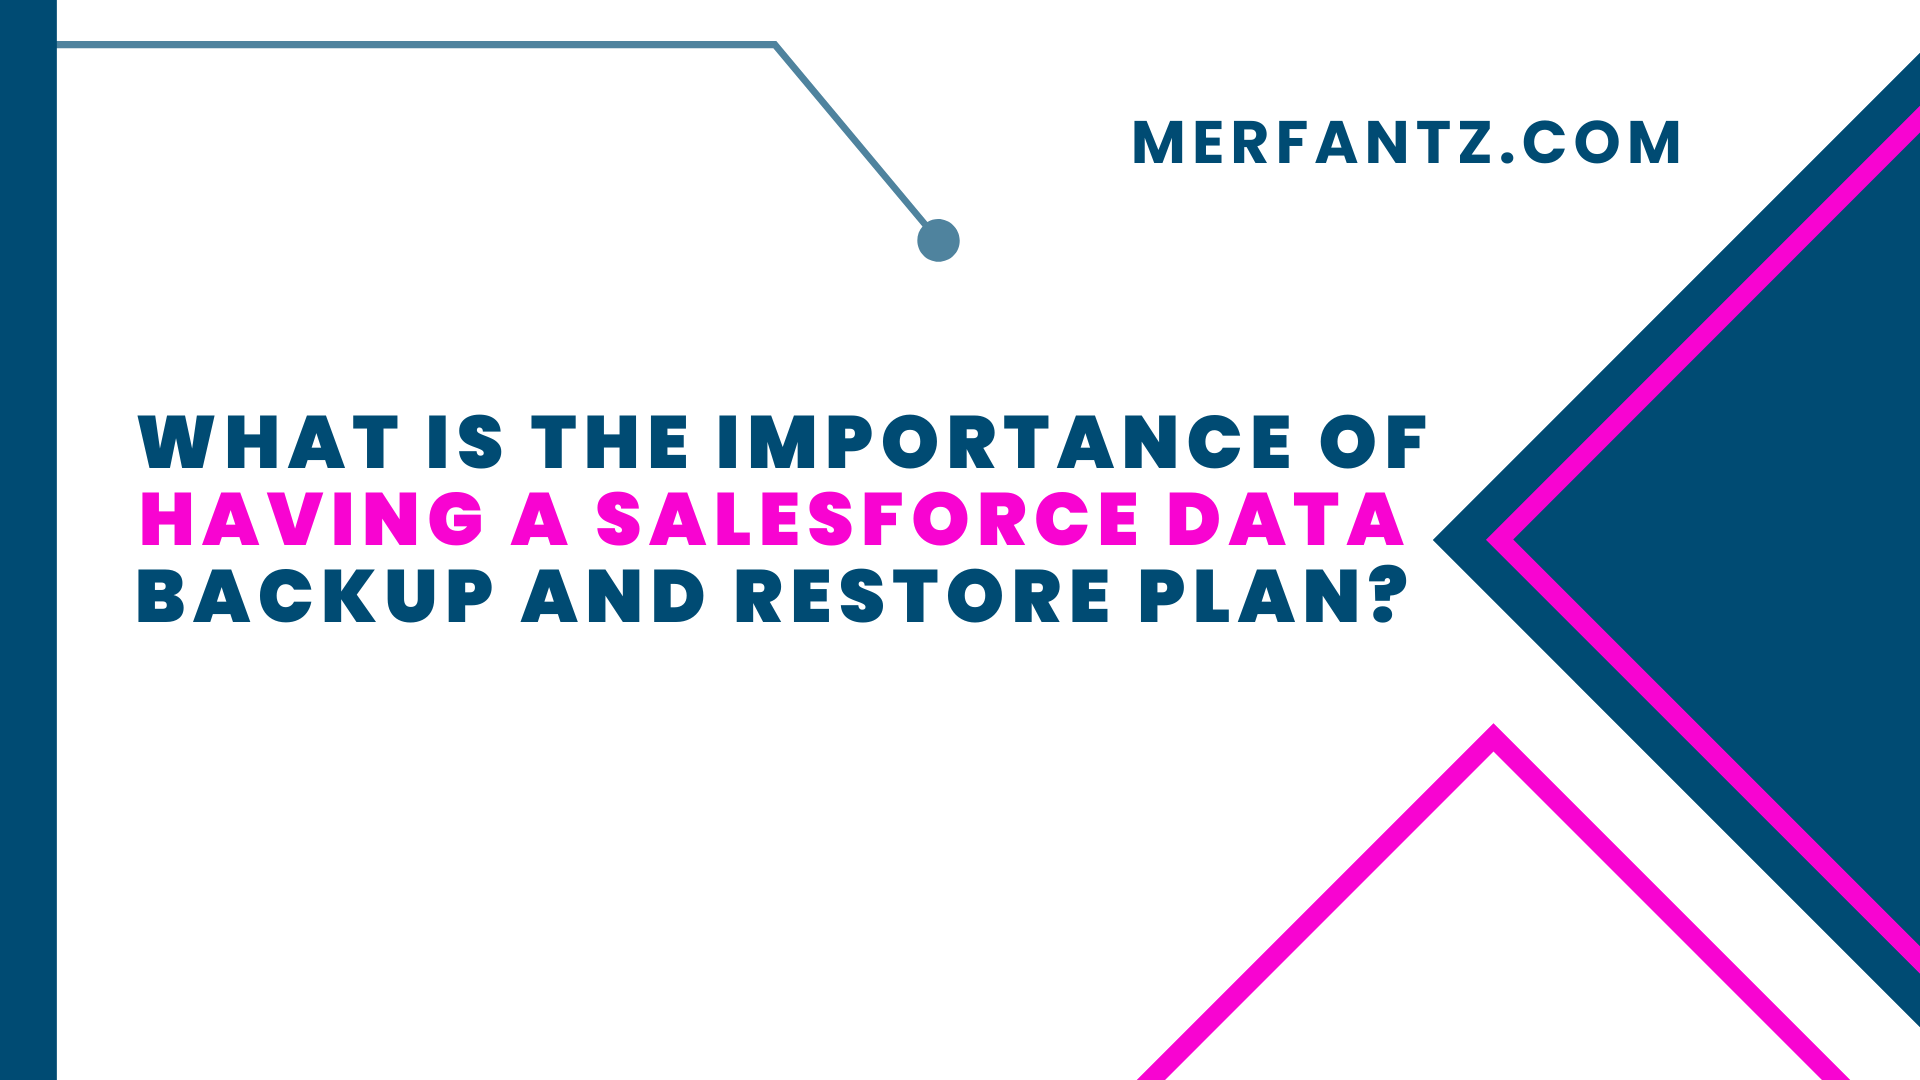 What is the Importance of Having a Salesforce Data Backup and Restore Plan